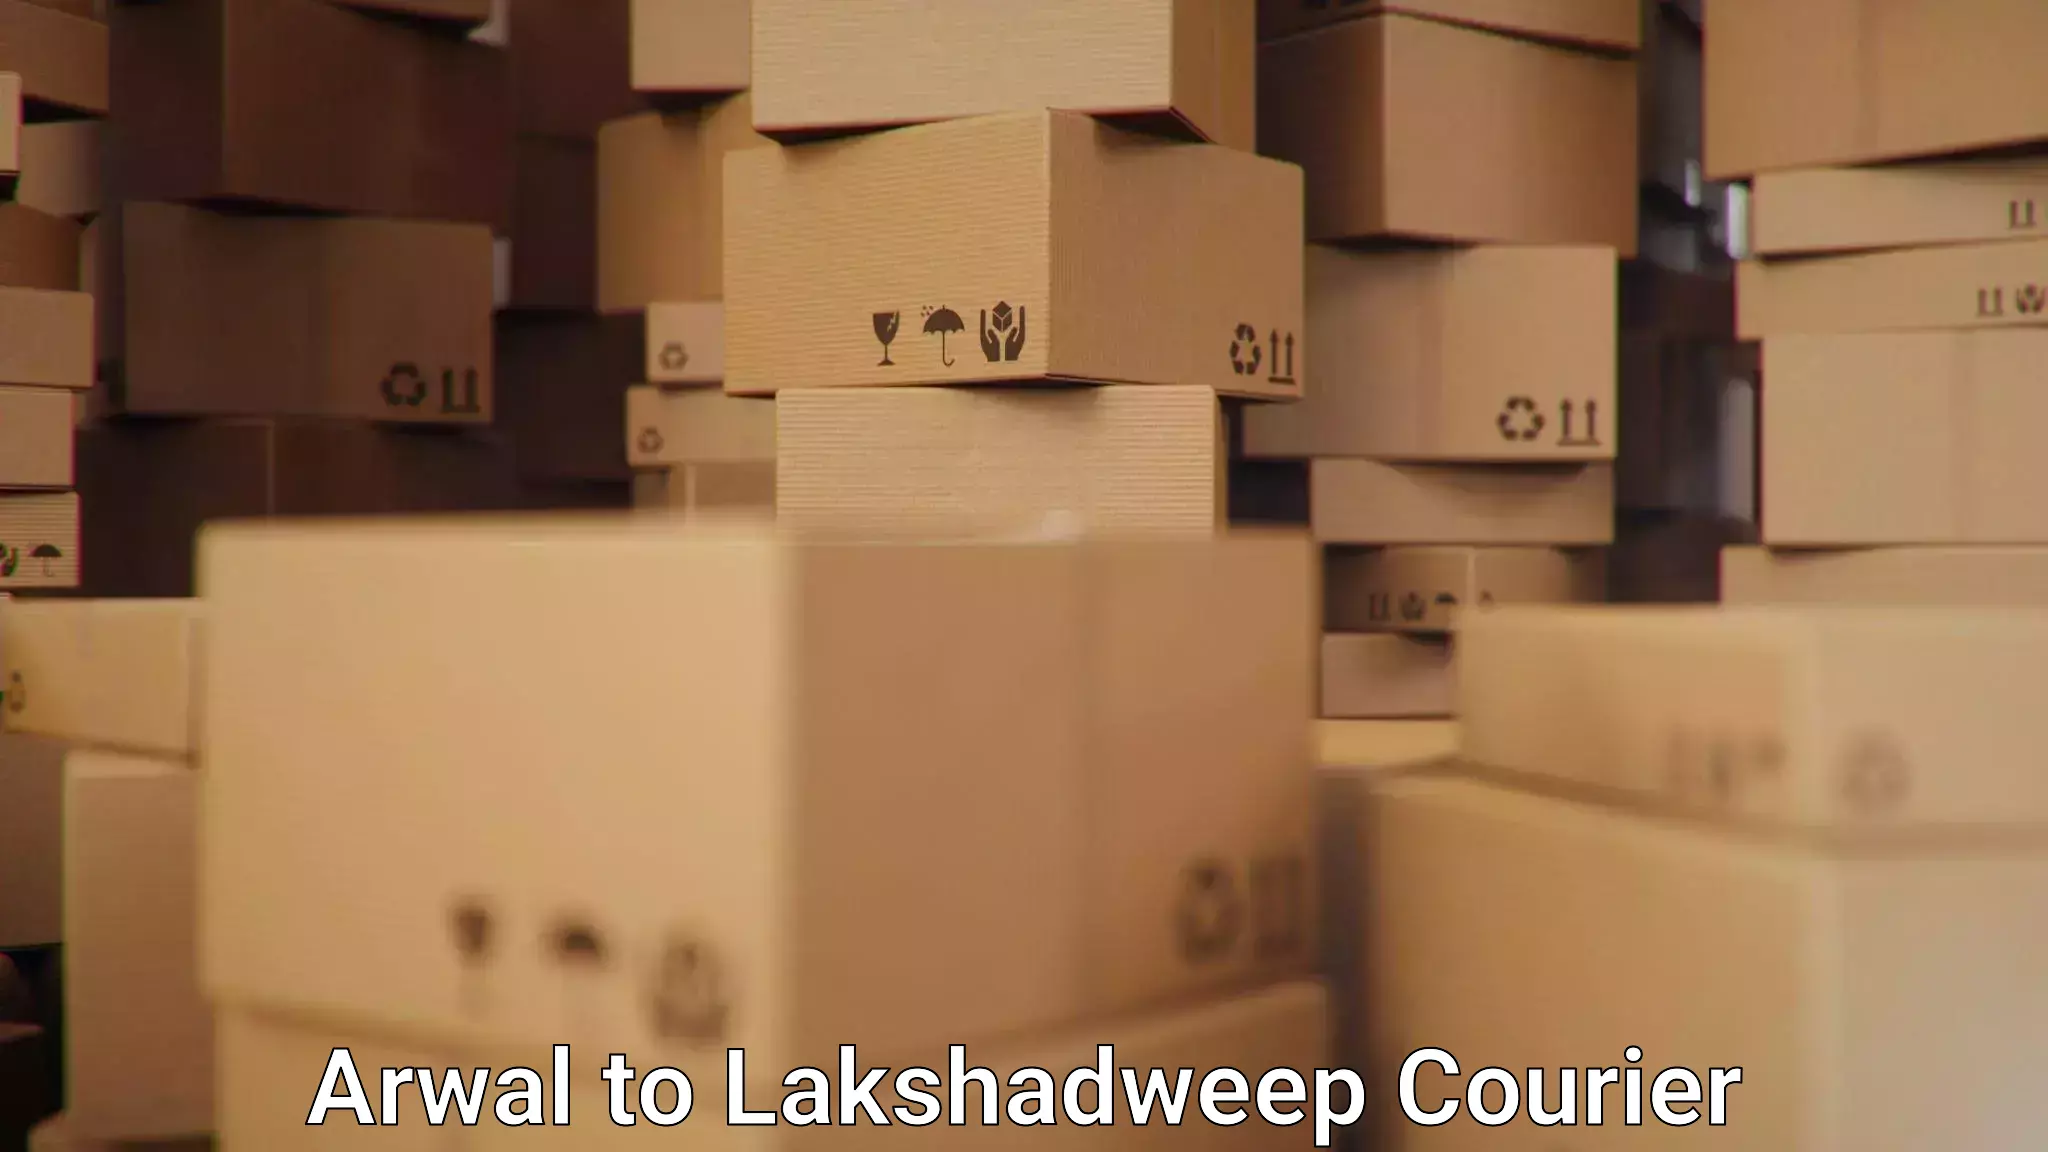 Multi-service courier options Arwal to Lakshadweep